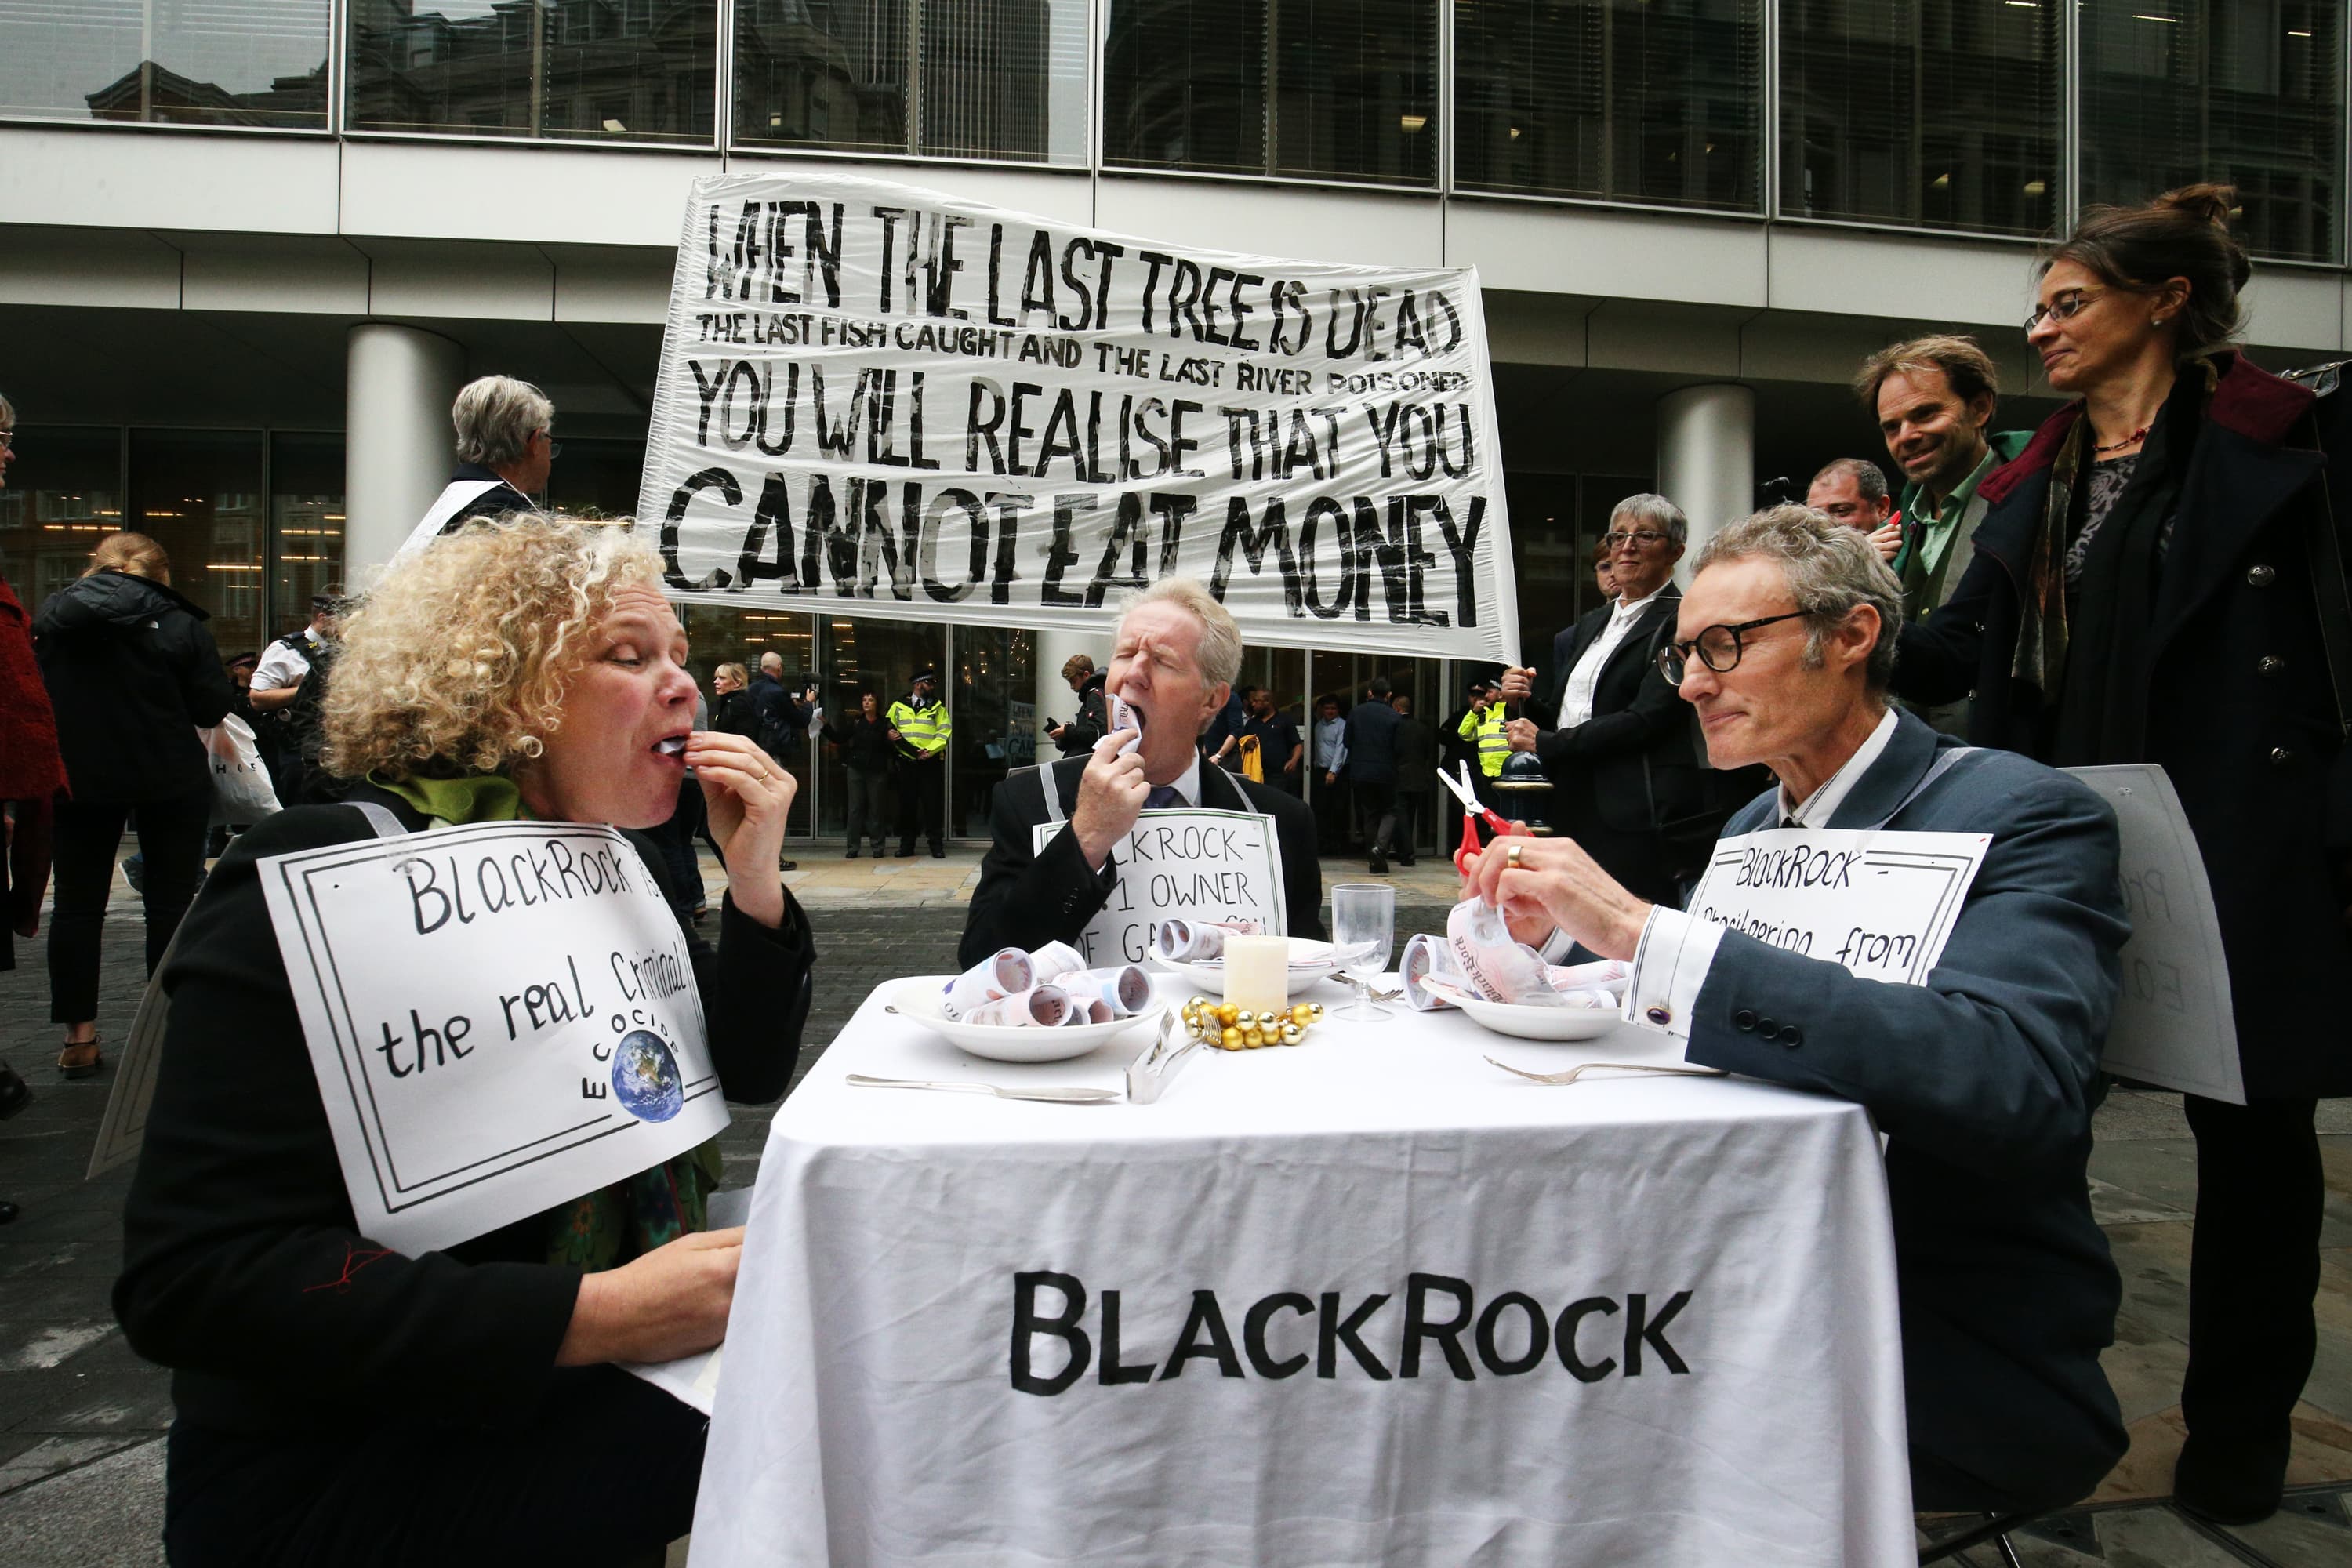 Climate change activists target BlackRock offices amid wave of London protests - CNBC